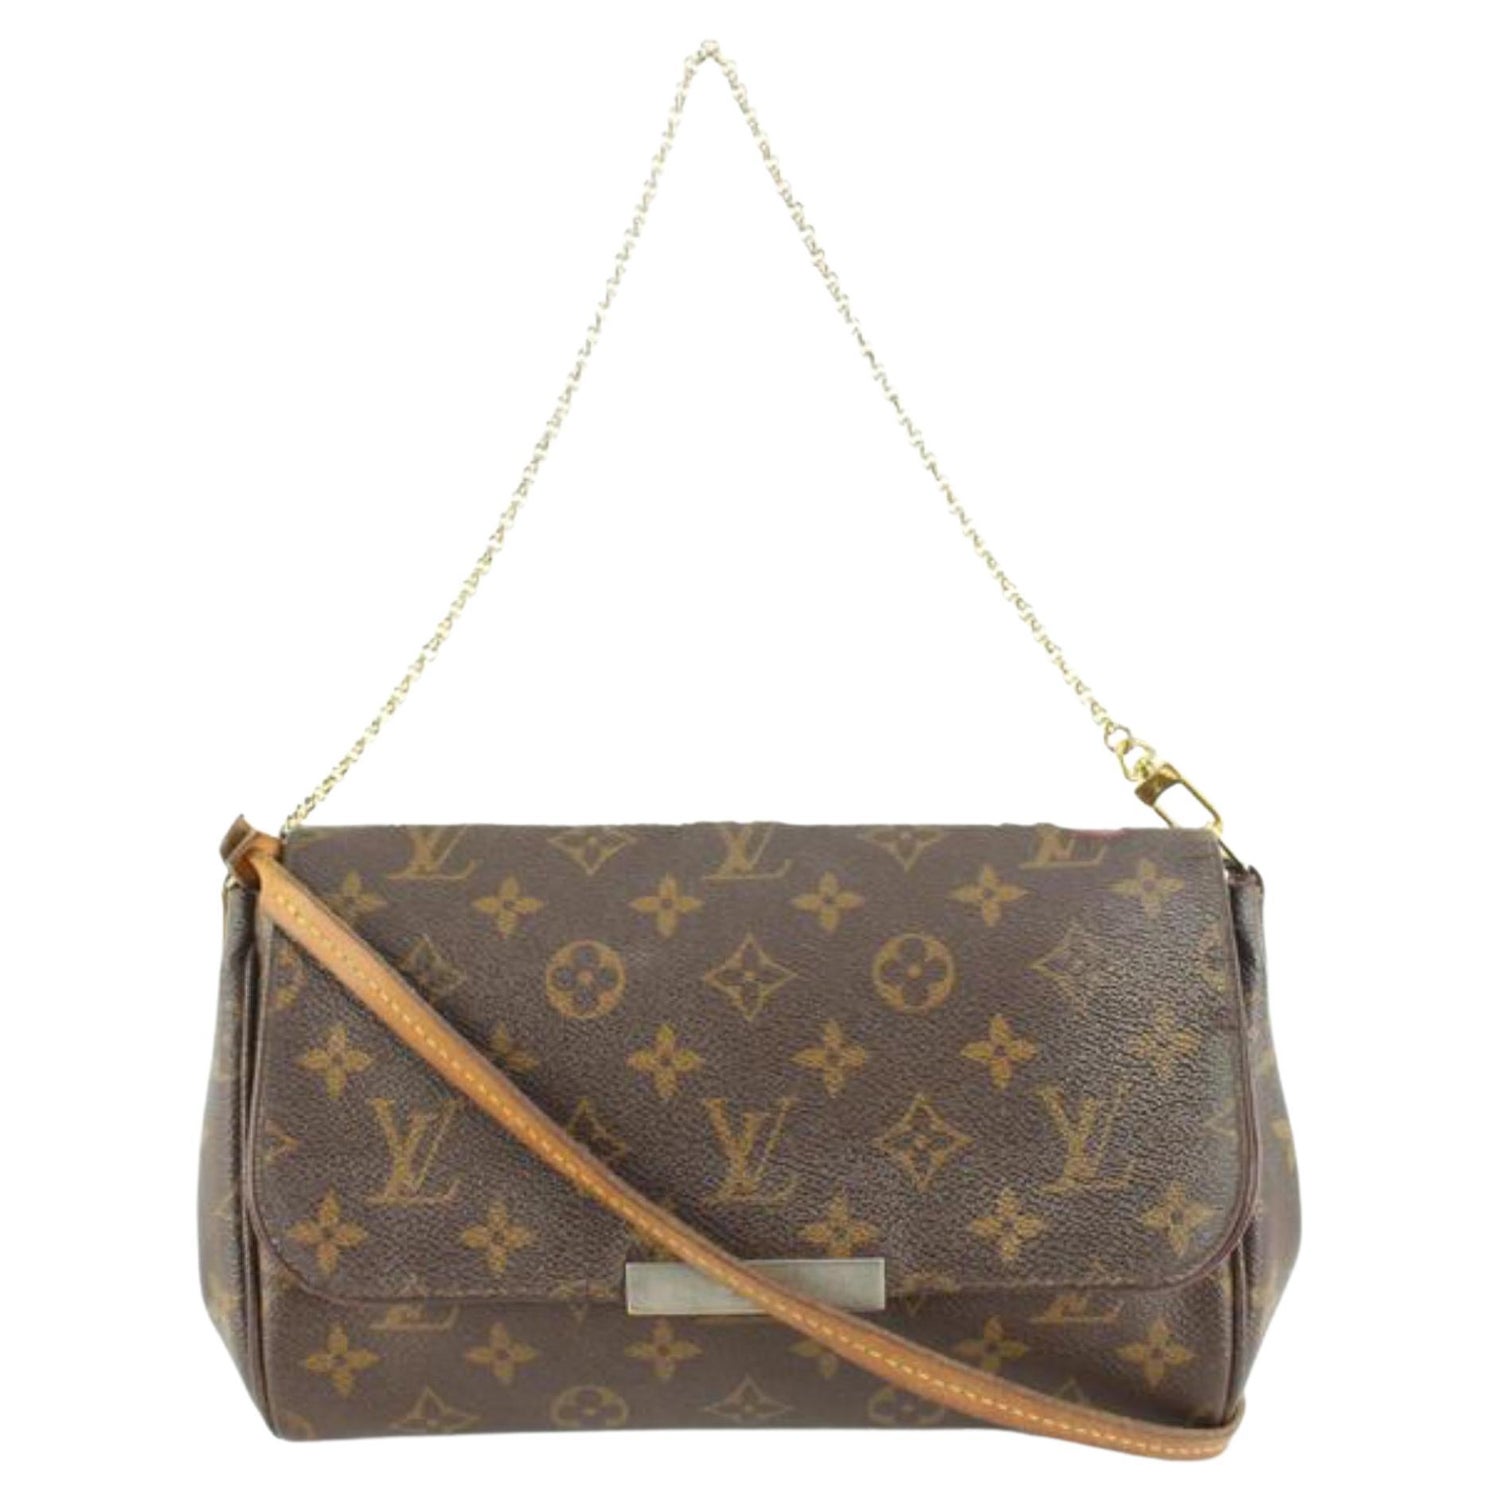 What does PM mean in Louis Vuitton terminology? - Questions